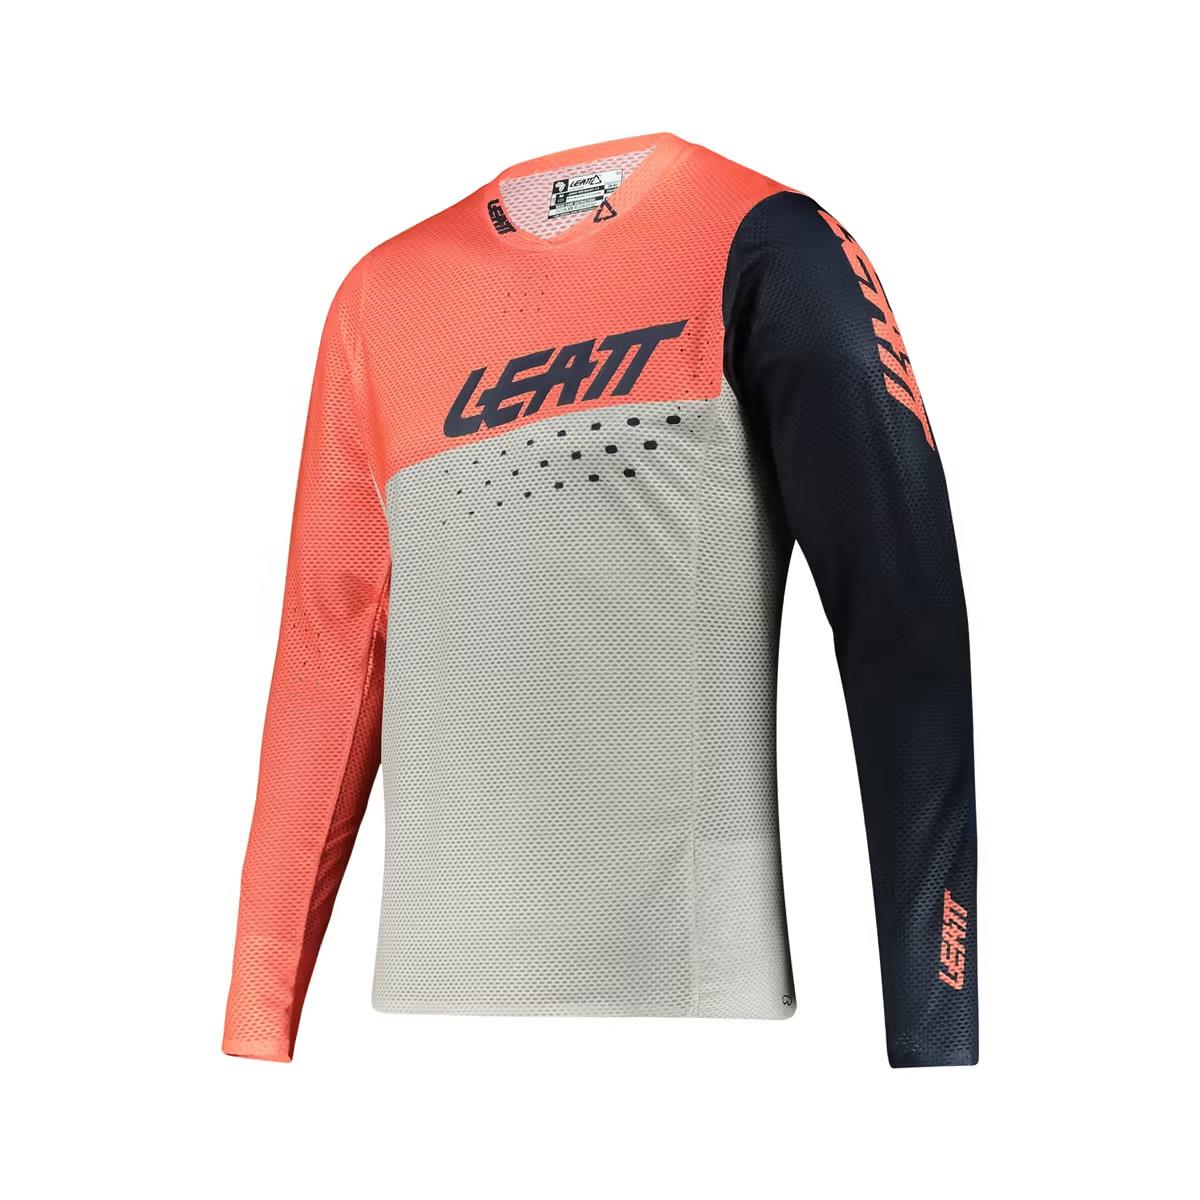 Maillot Manches Longues Mtb Gravity 4.0 Coral taille XXL